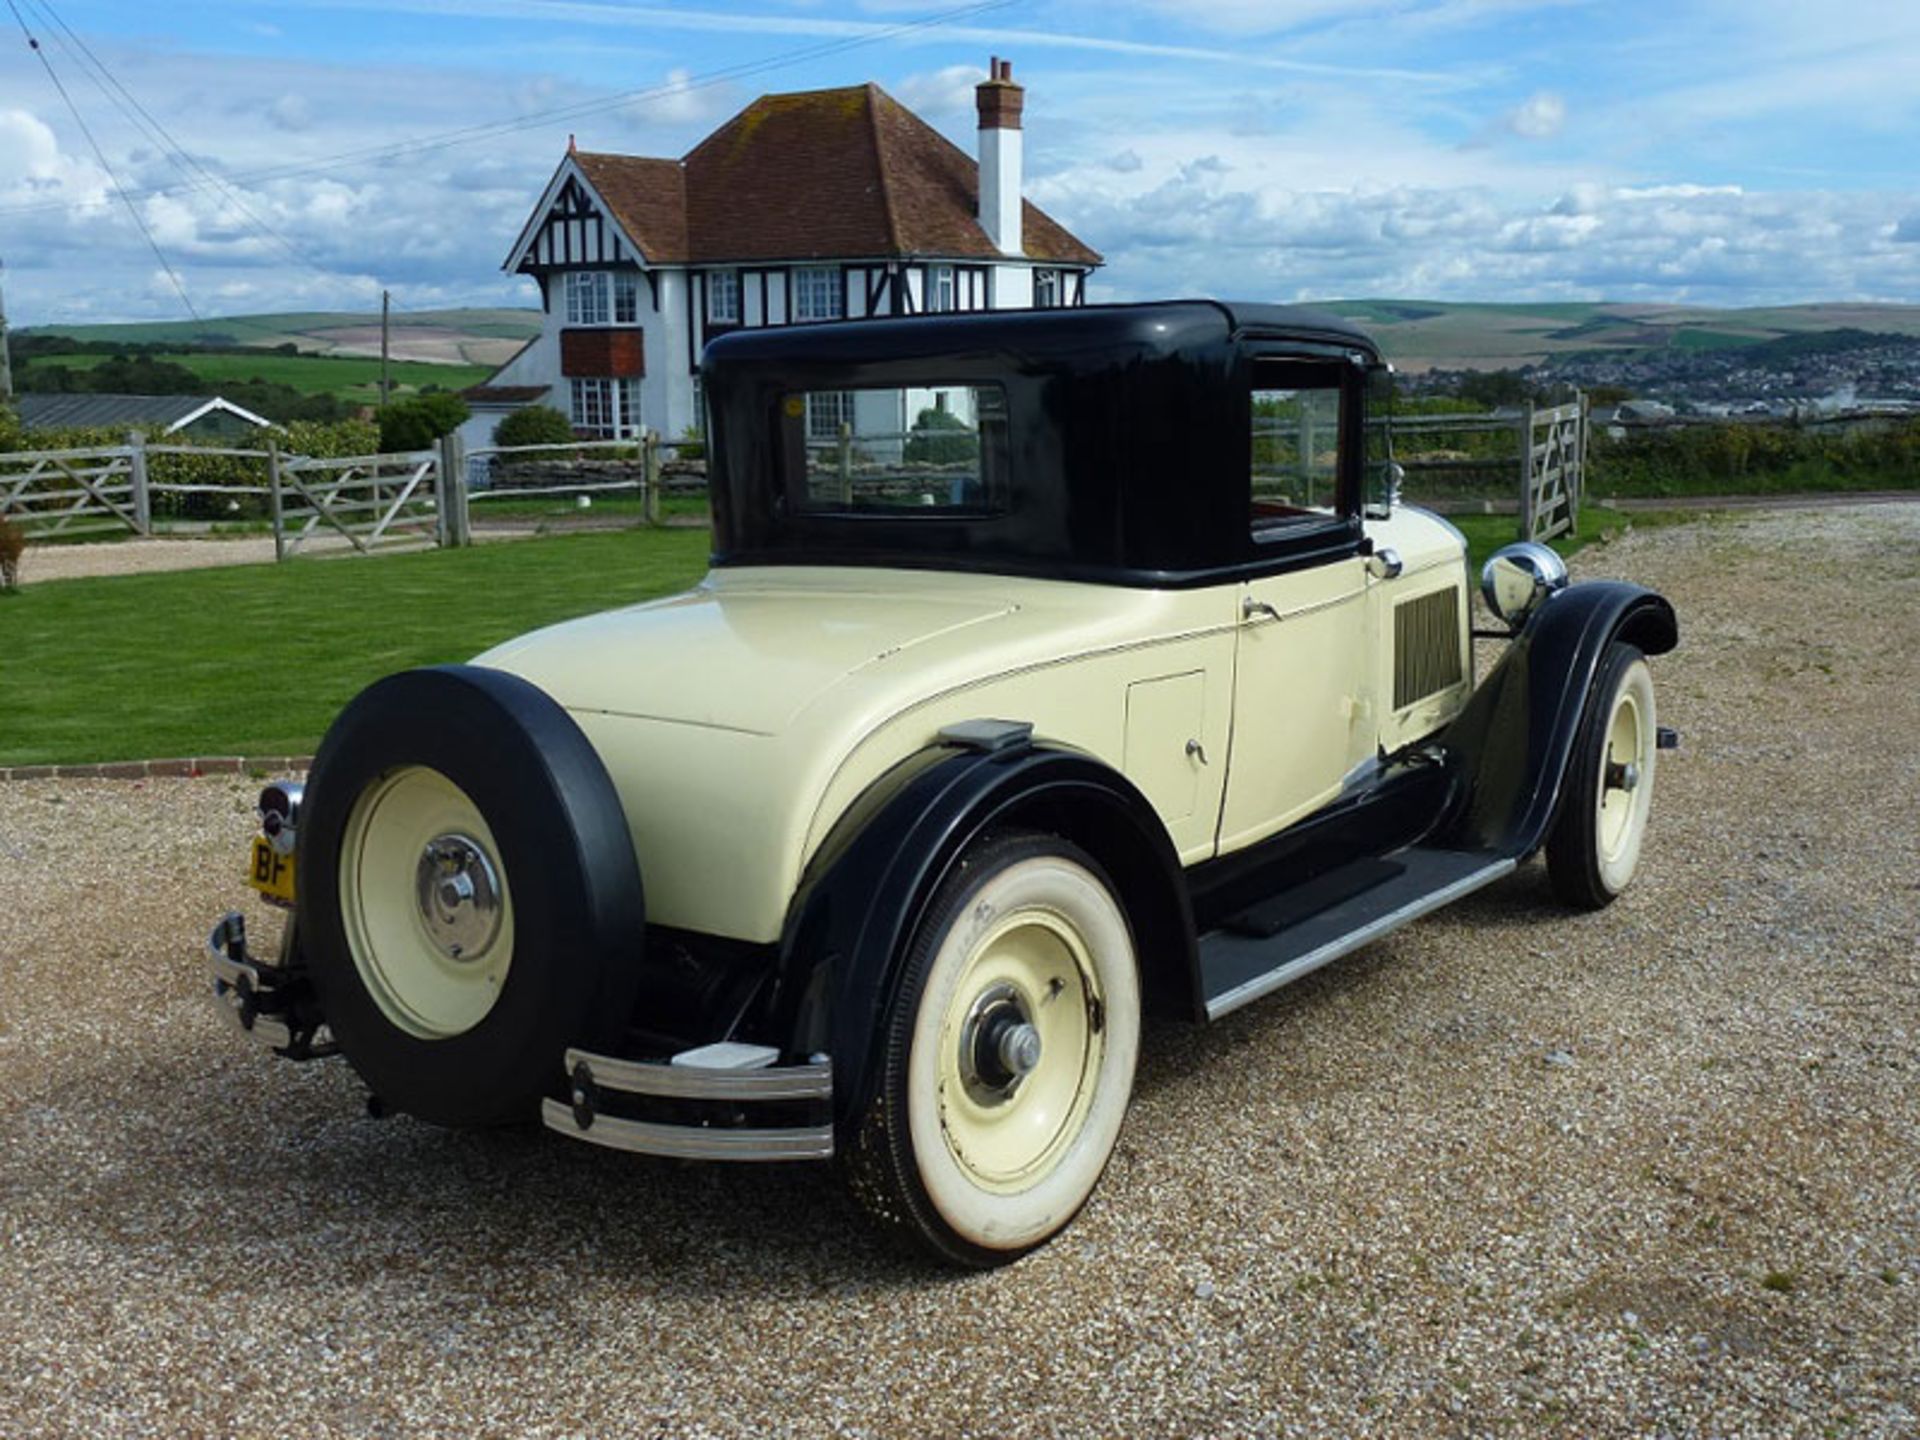 - California car restored in USA

- 8 cylinder 3945cc engine

- Rumble seat to rear compartment - Image 3 of 7